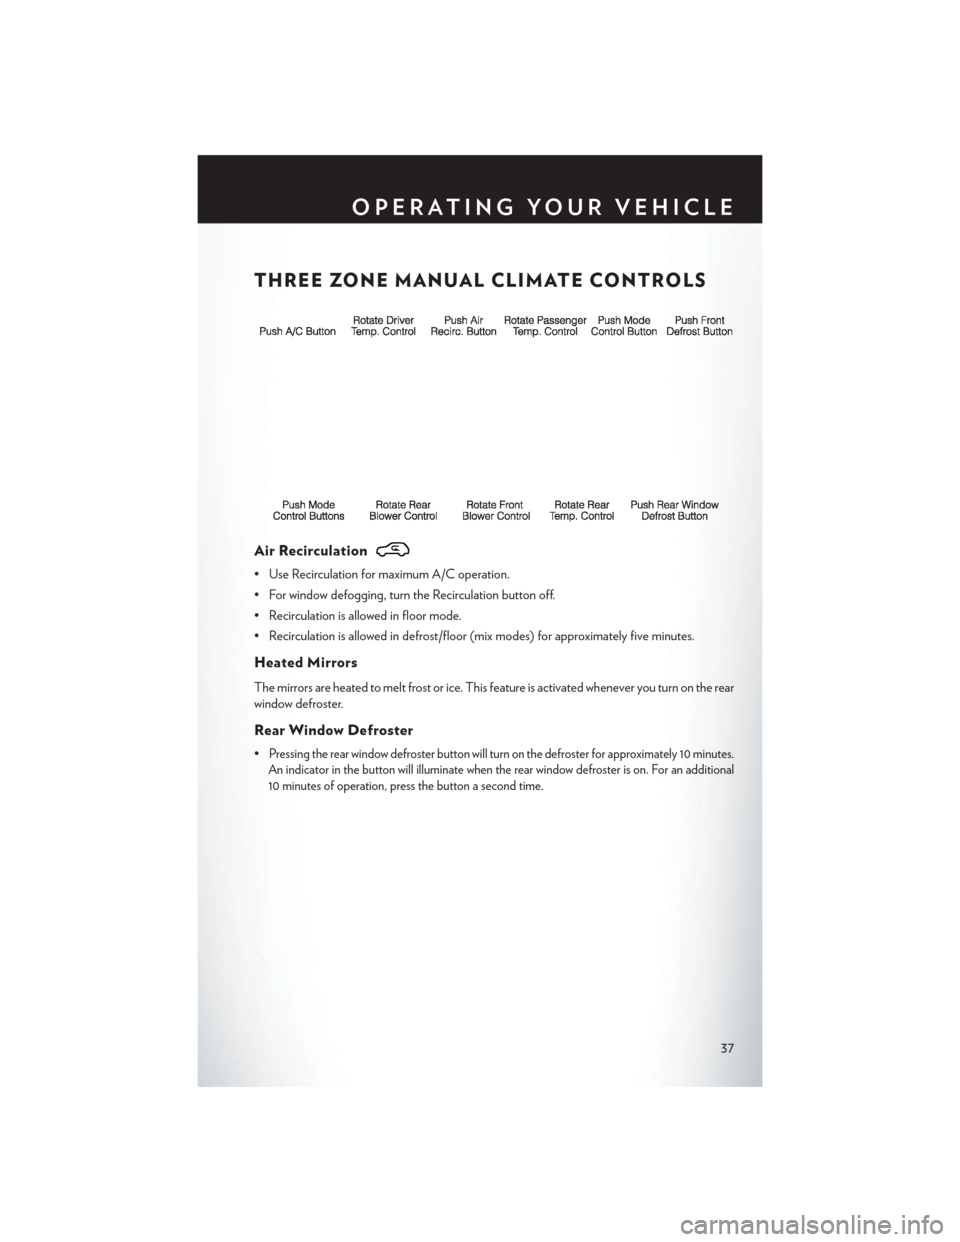 CHRYSLER TOWN AND COUNTRY 2014 5.G User Guide THREE ZONE MANUAL CLIMATE CONTROLS
Air Recirculation
• Use Recirculation for maximum A/C operation.
• For window defogging, turn the Recirculation button off.
• Recirculation is allowed in floor